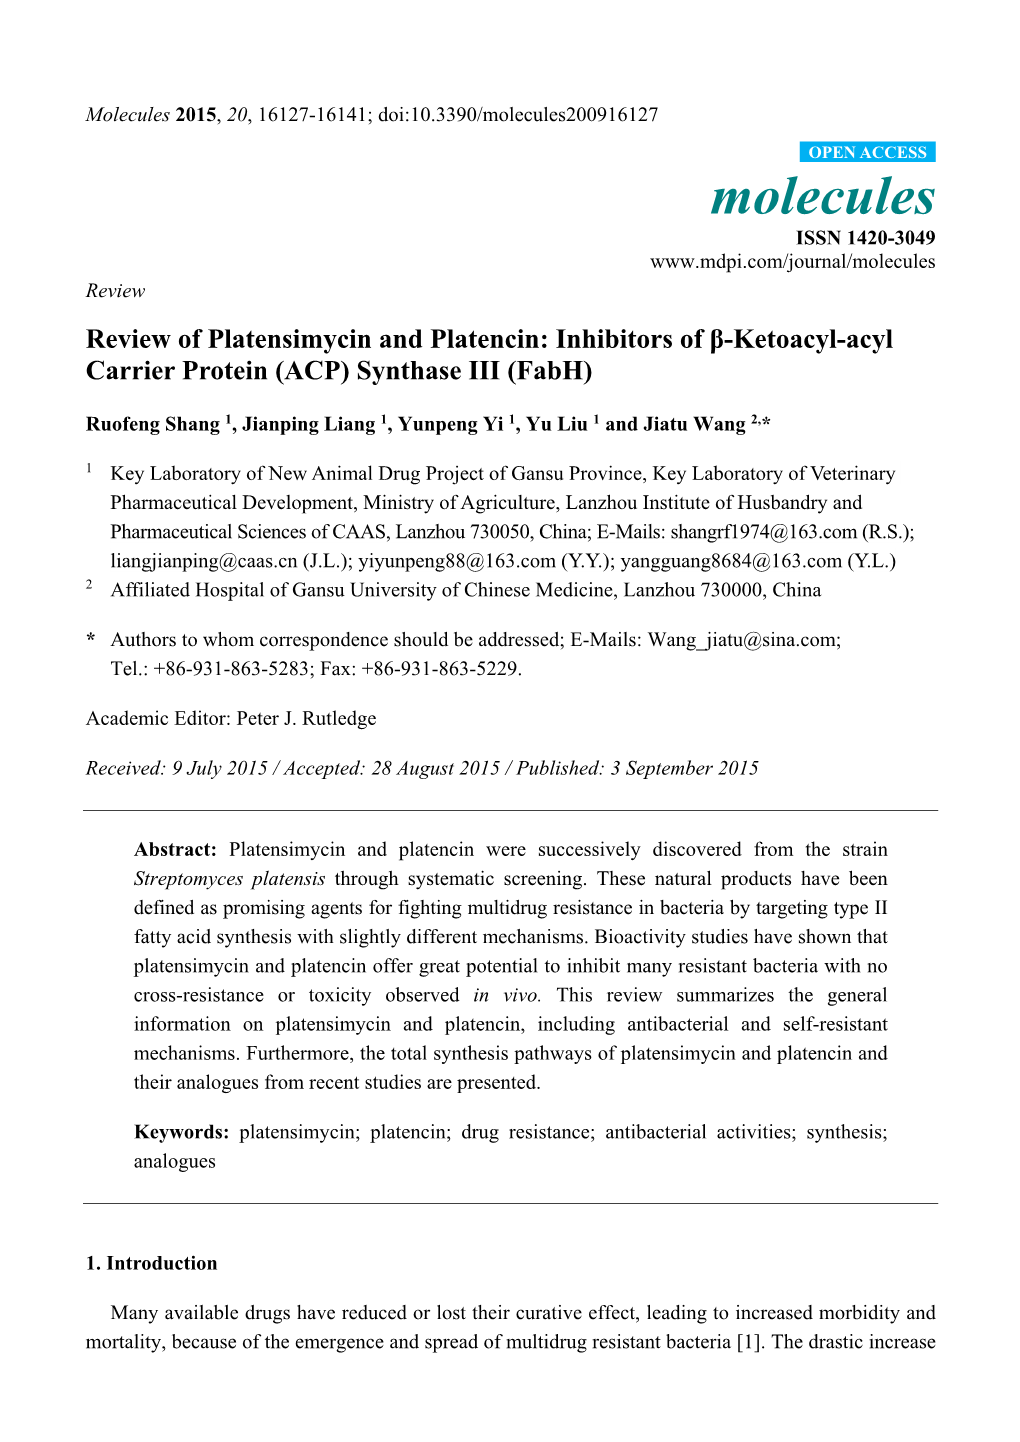 Review of Platensimycin and Platencin: Inhibitors of Β-Ketoacyl-Acyl Carrier Protein (ACP) Synthase III (Fabh)